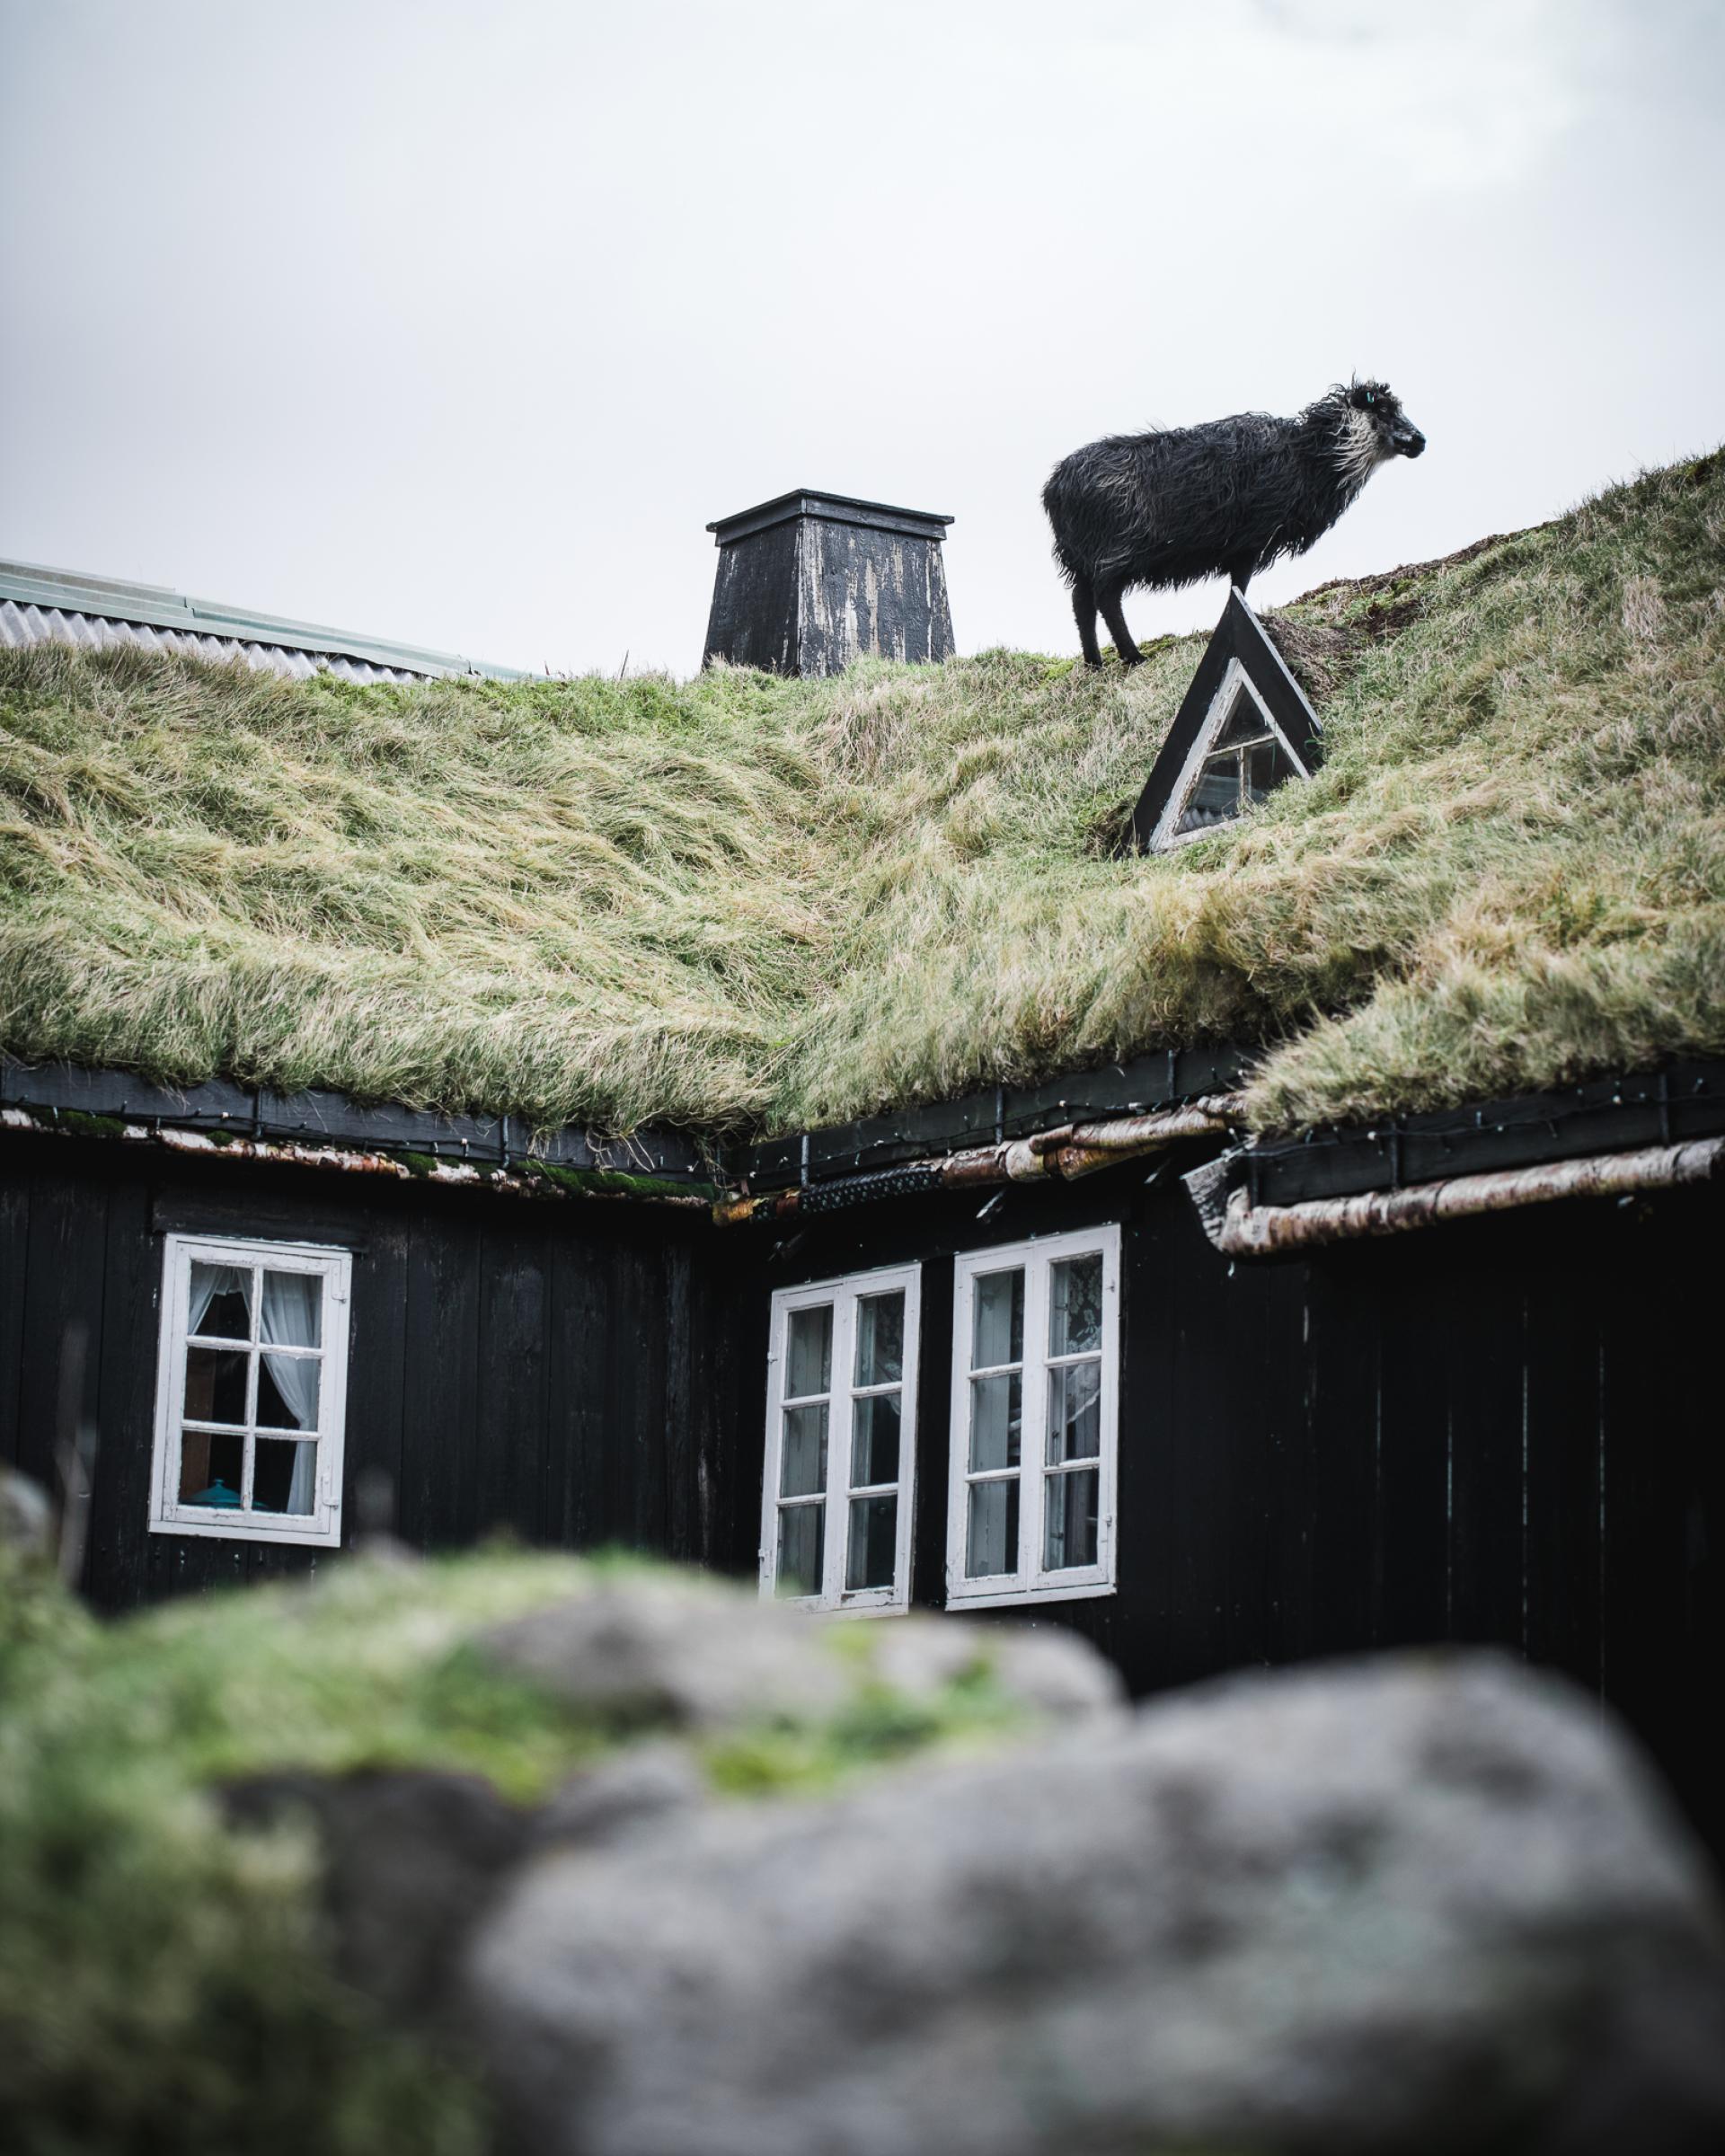 Faroese sheep on a grass roofed house in the Faroe Islands